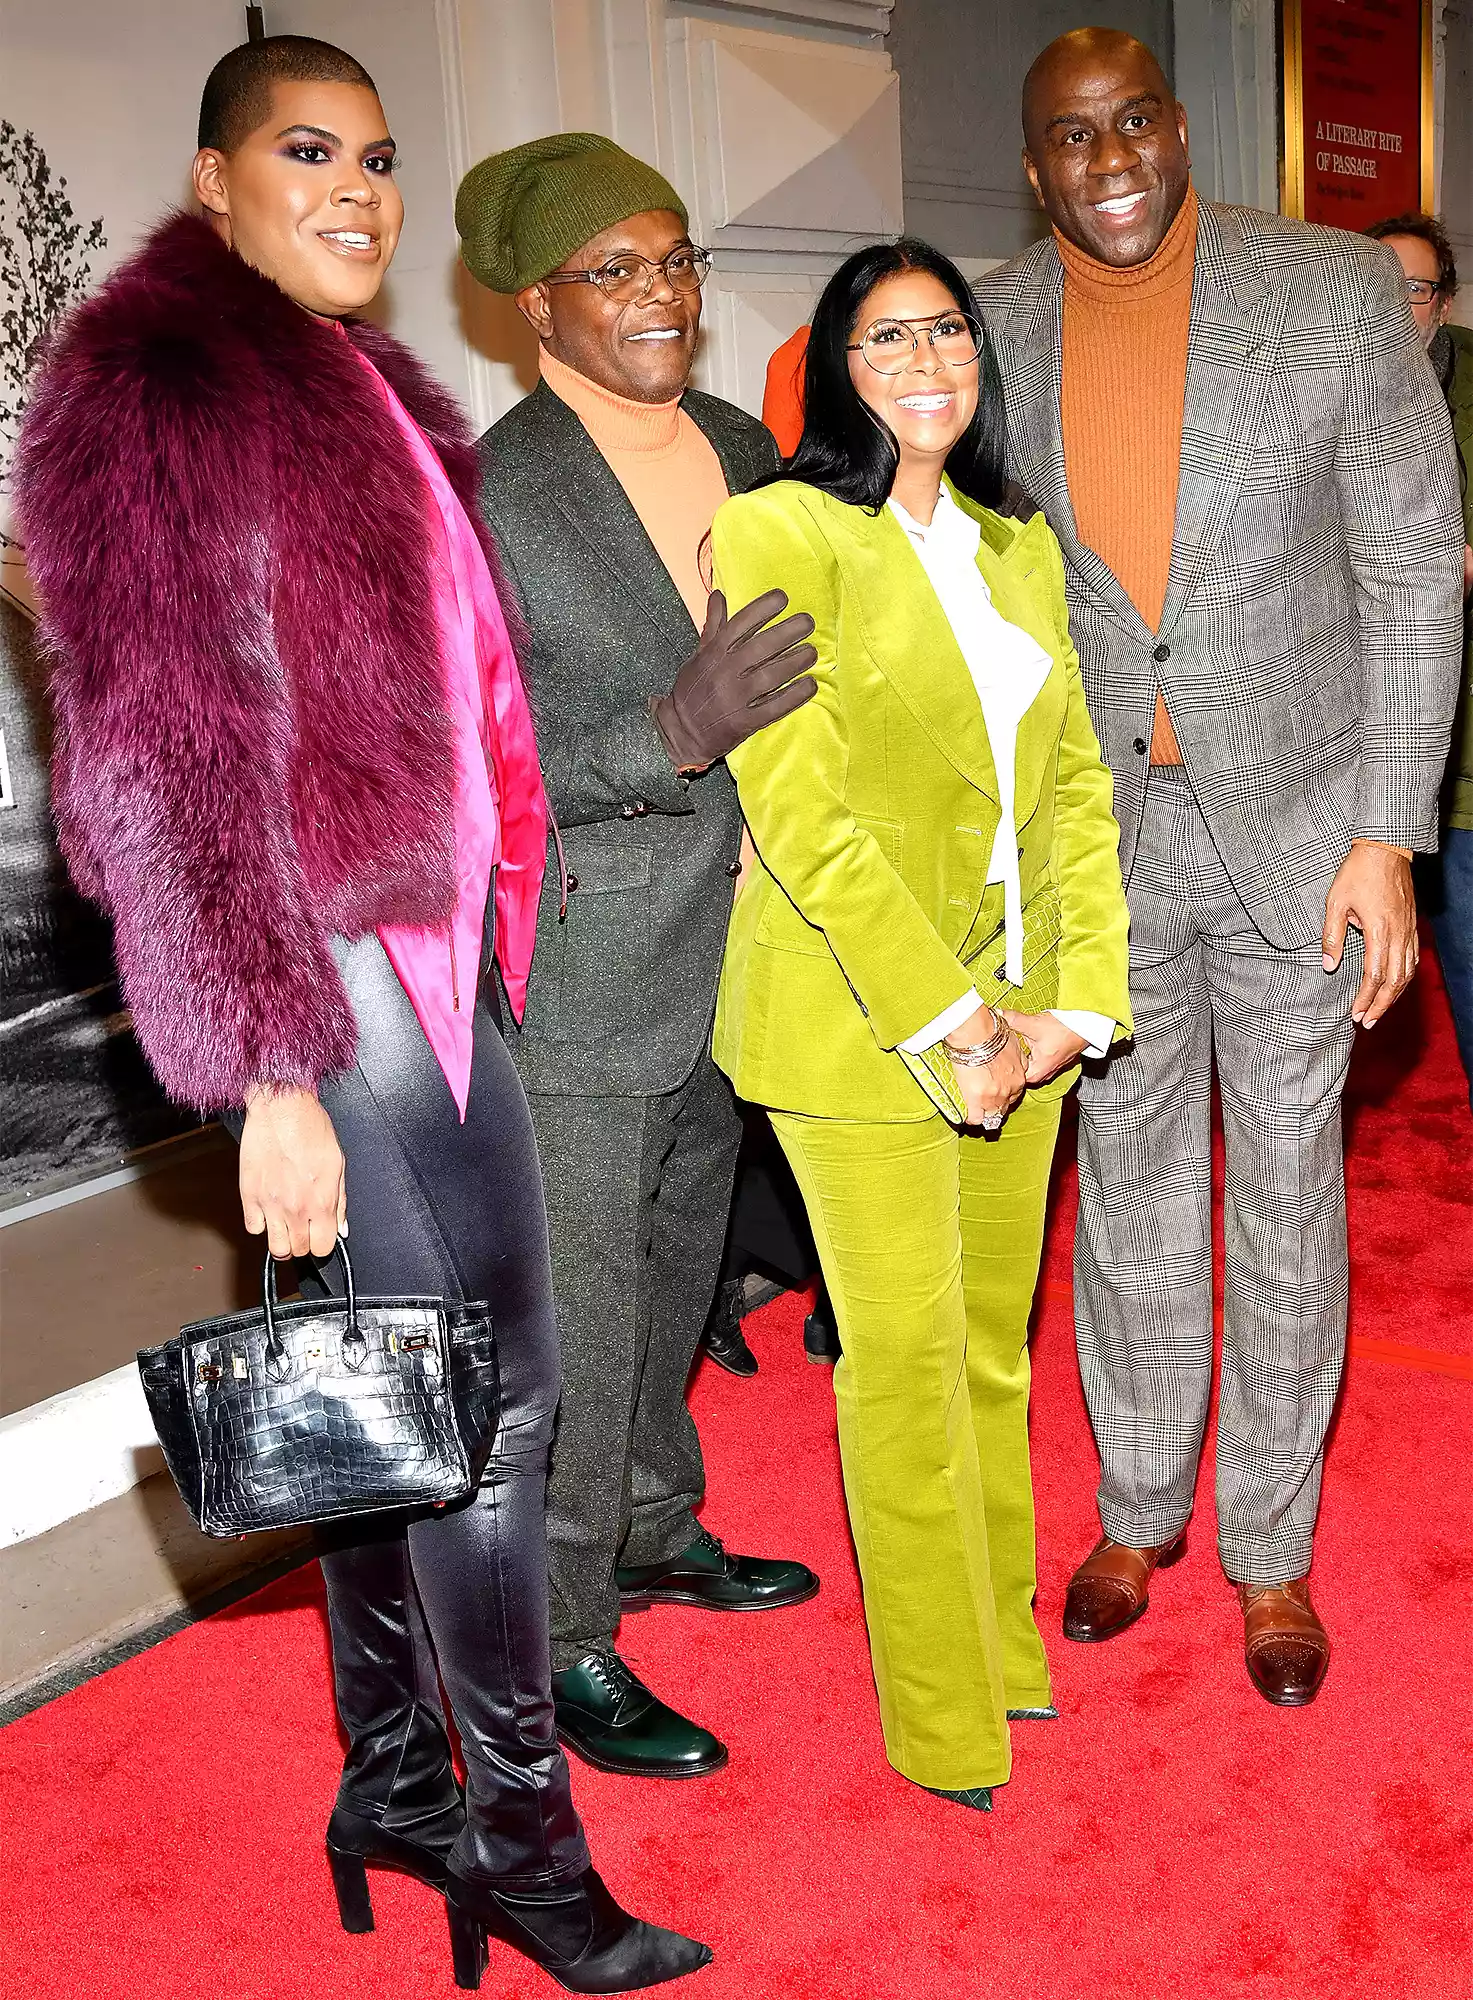 Magic Johnson, an NBA legend, and his family, including son EJ, walked the red carpet in New York